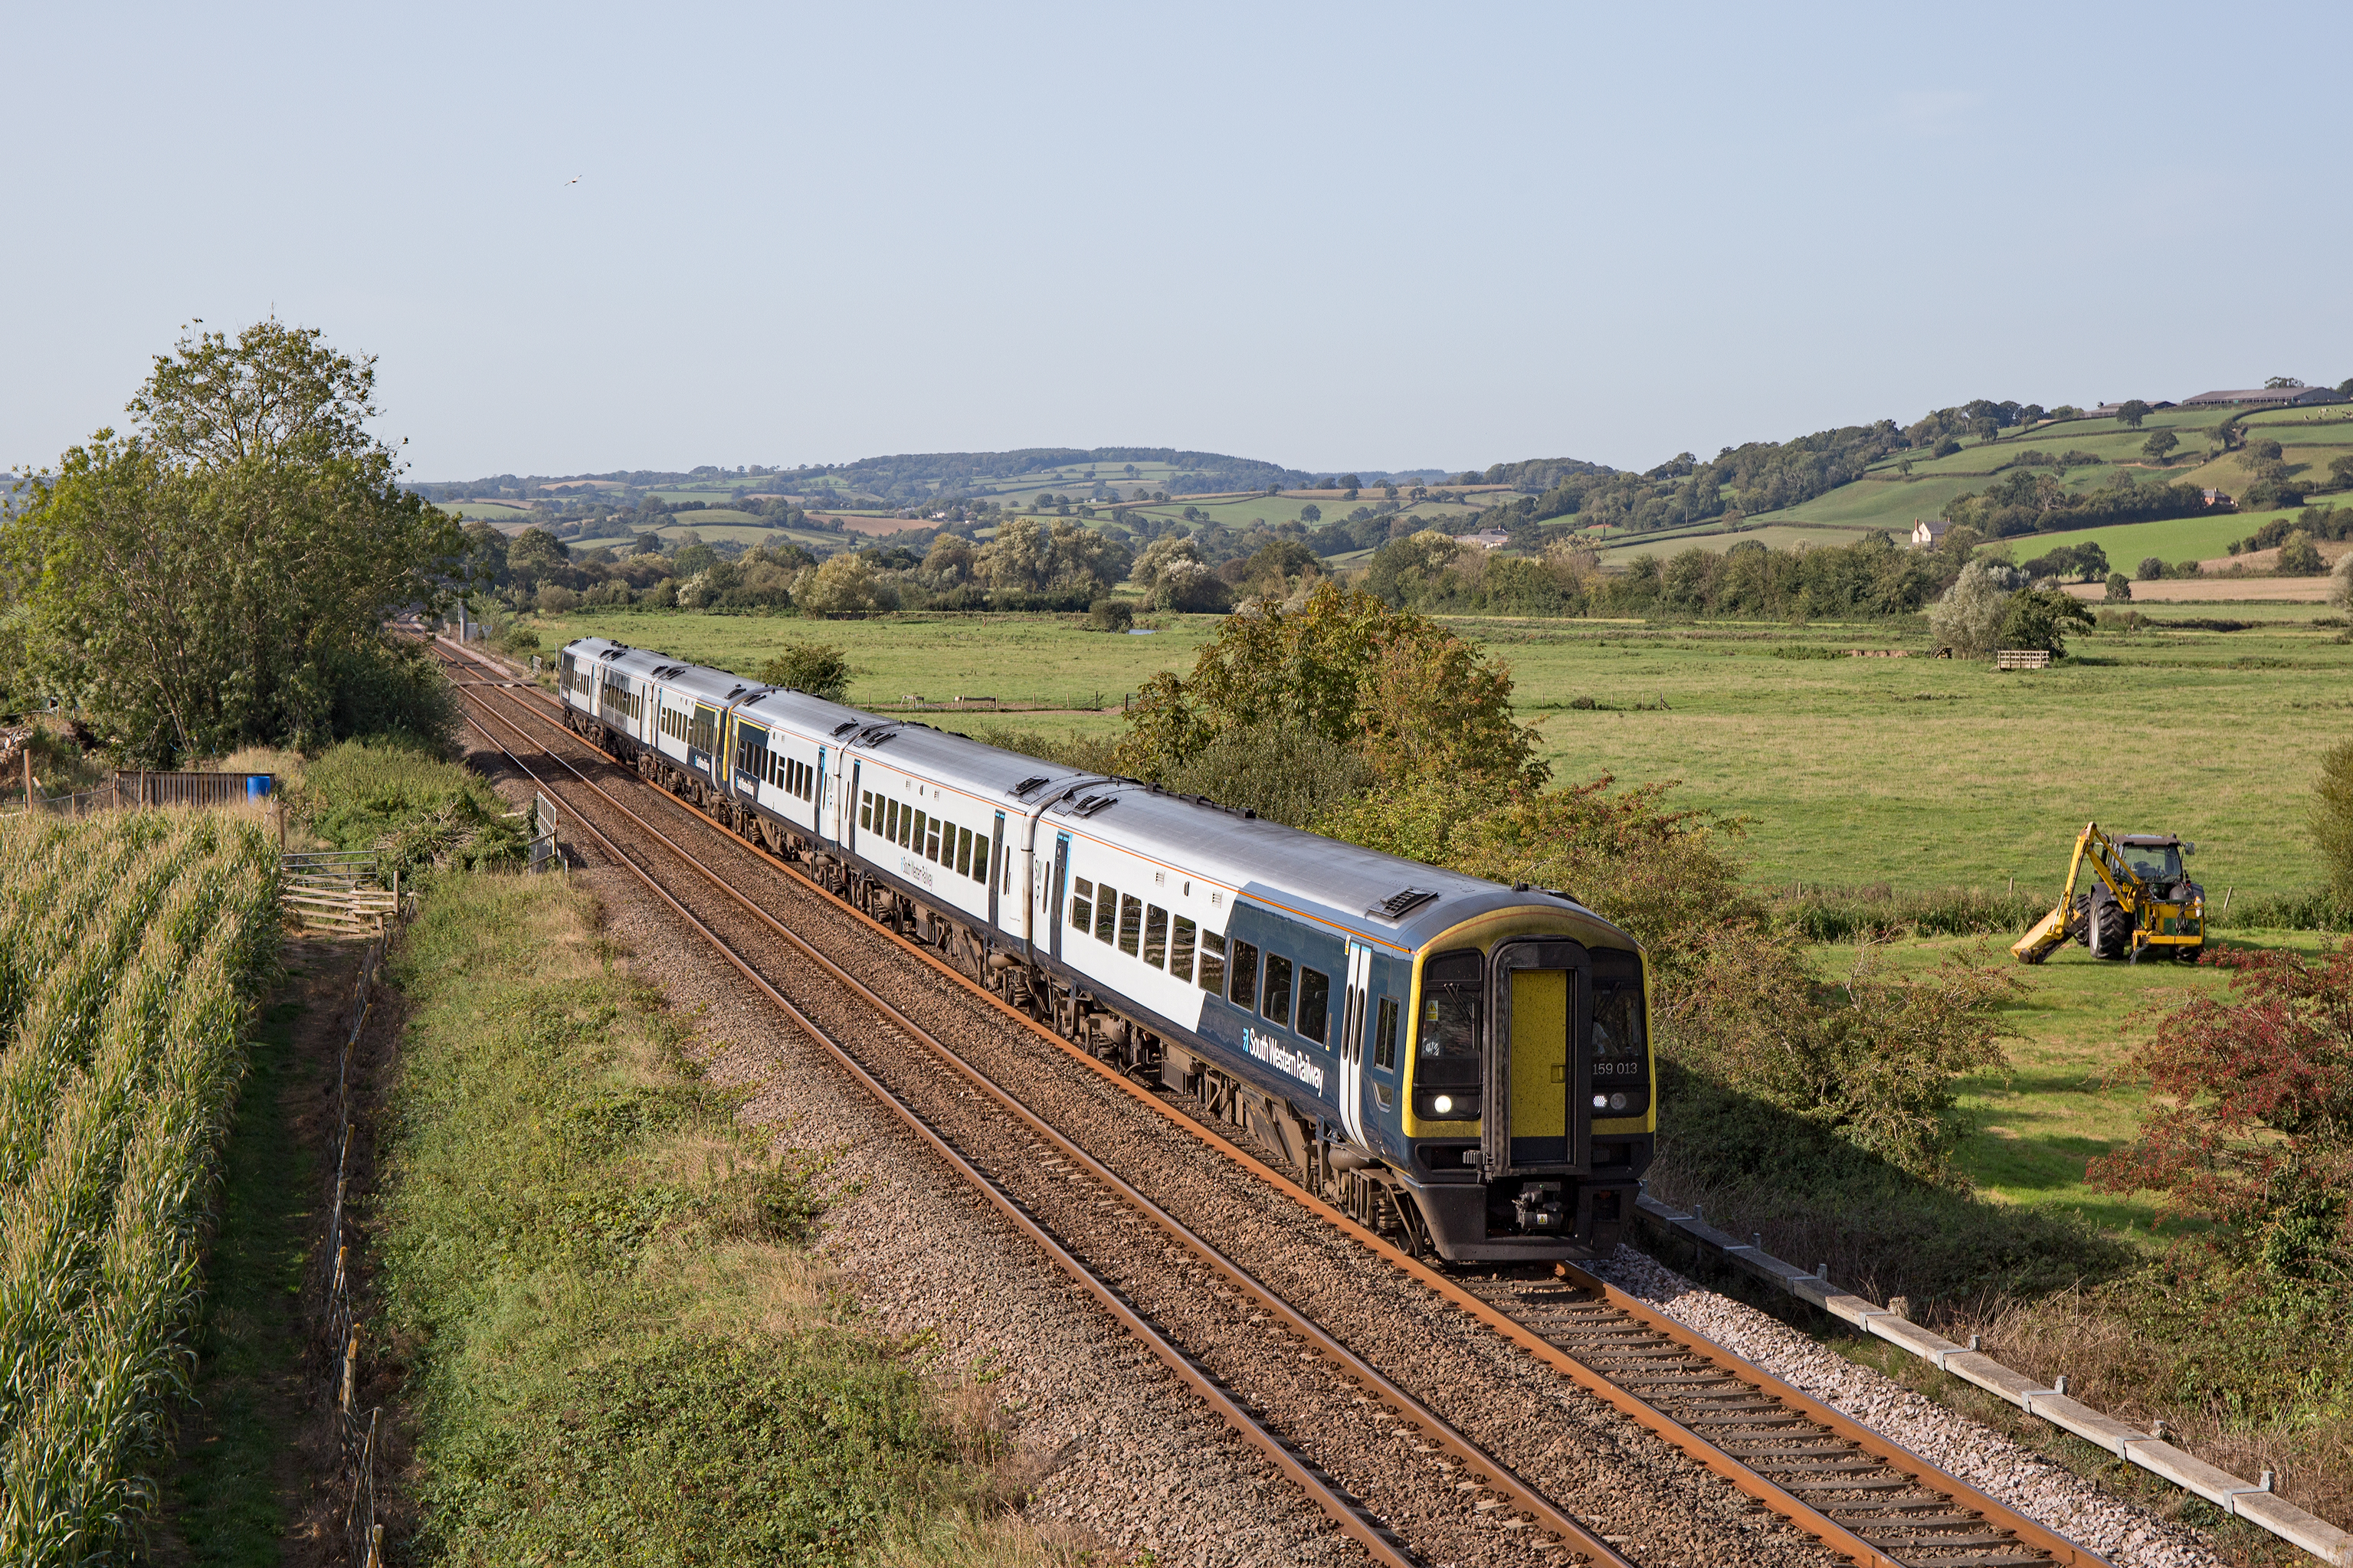 159 class train travelling through countryside